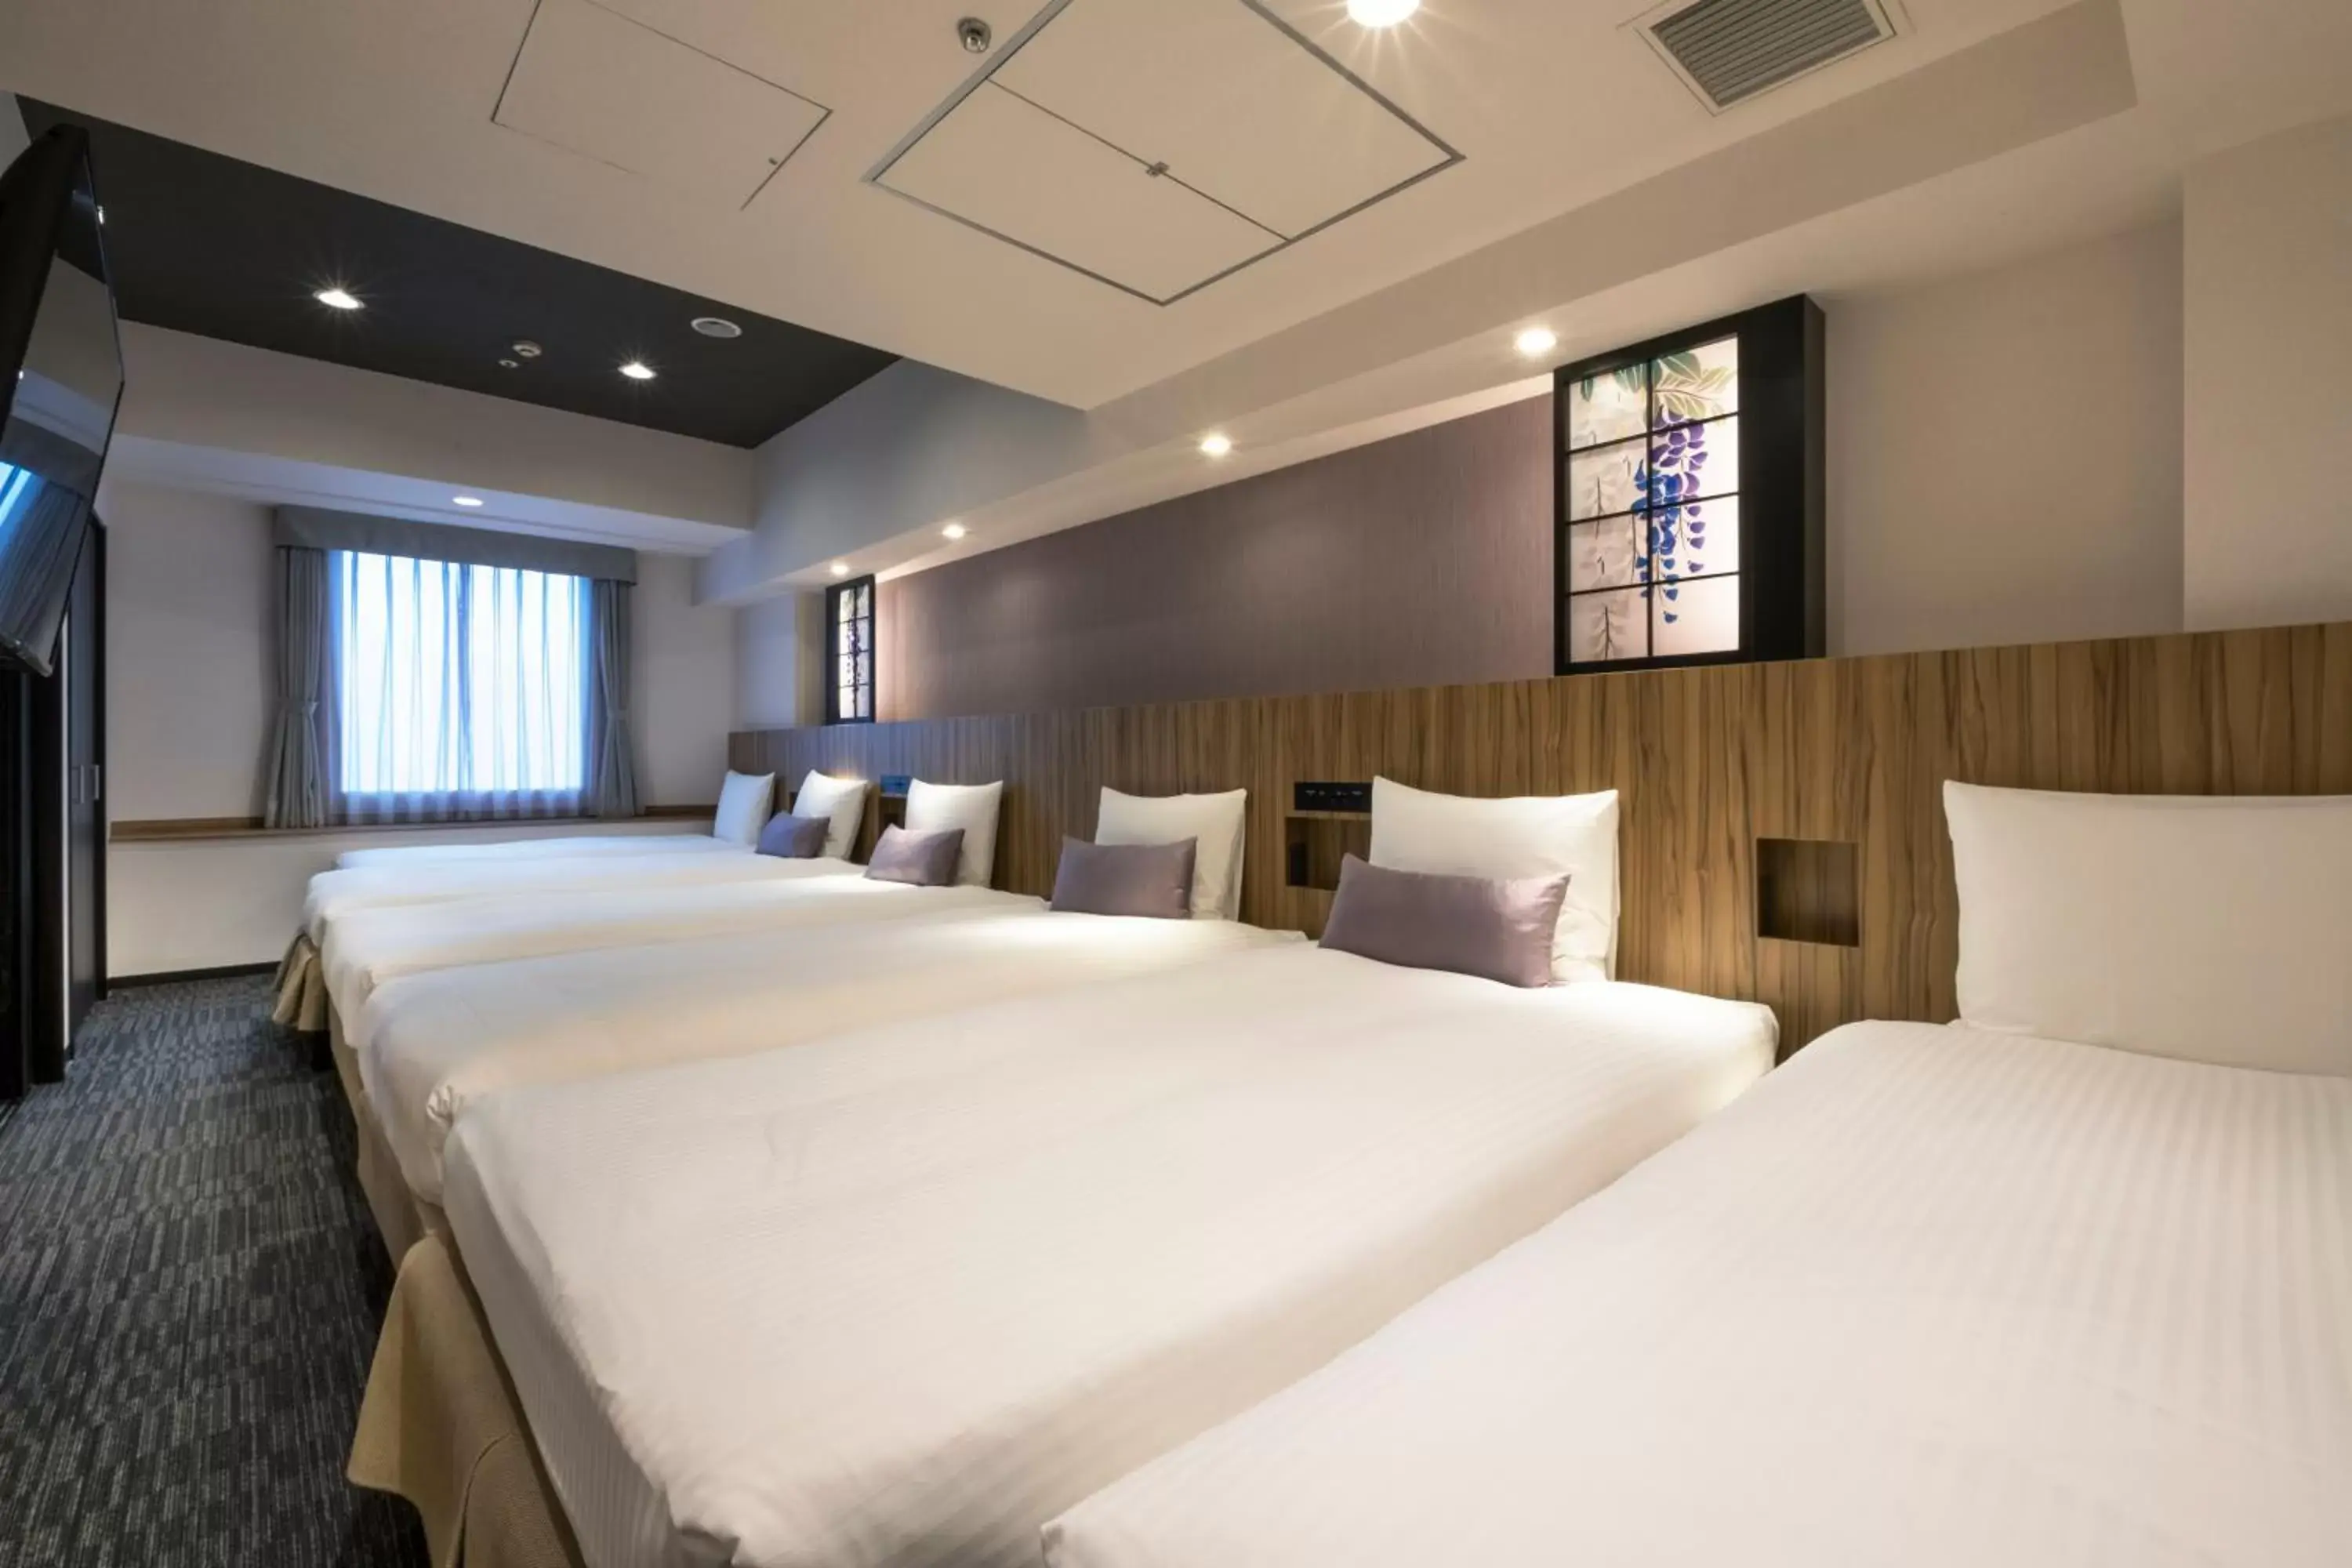 Family Suite for 6 people - Cleaning every 4 days in Hundred Stay Tokyo Shinjuku